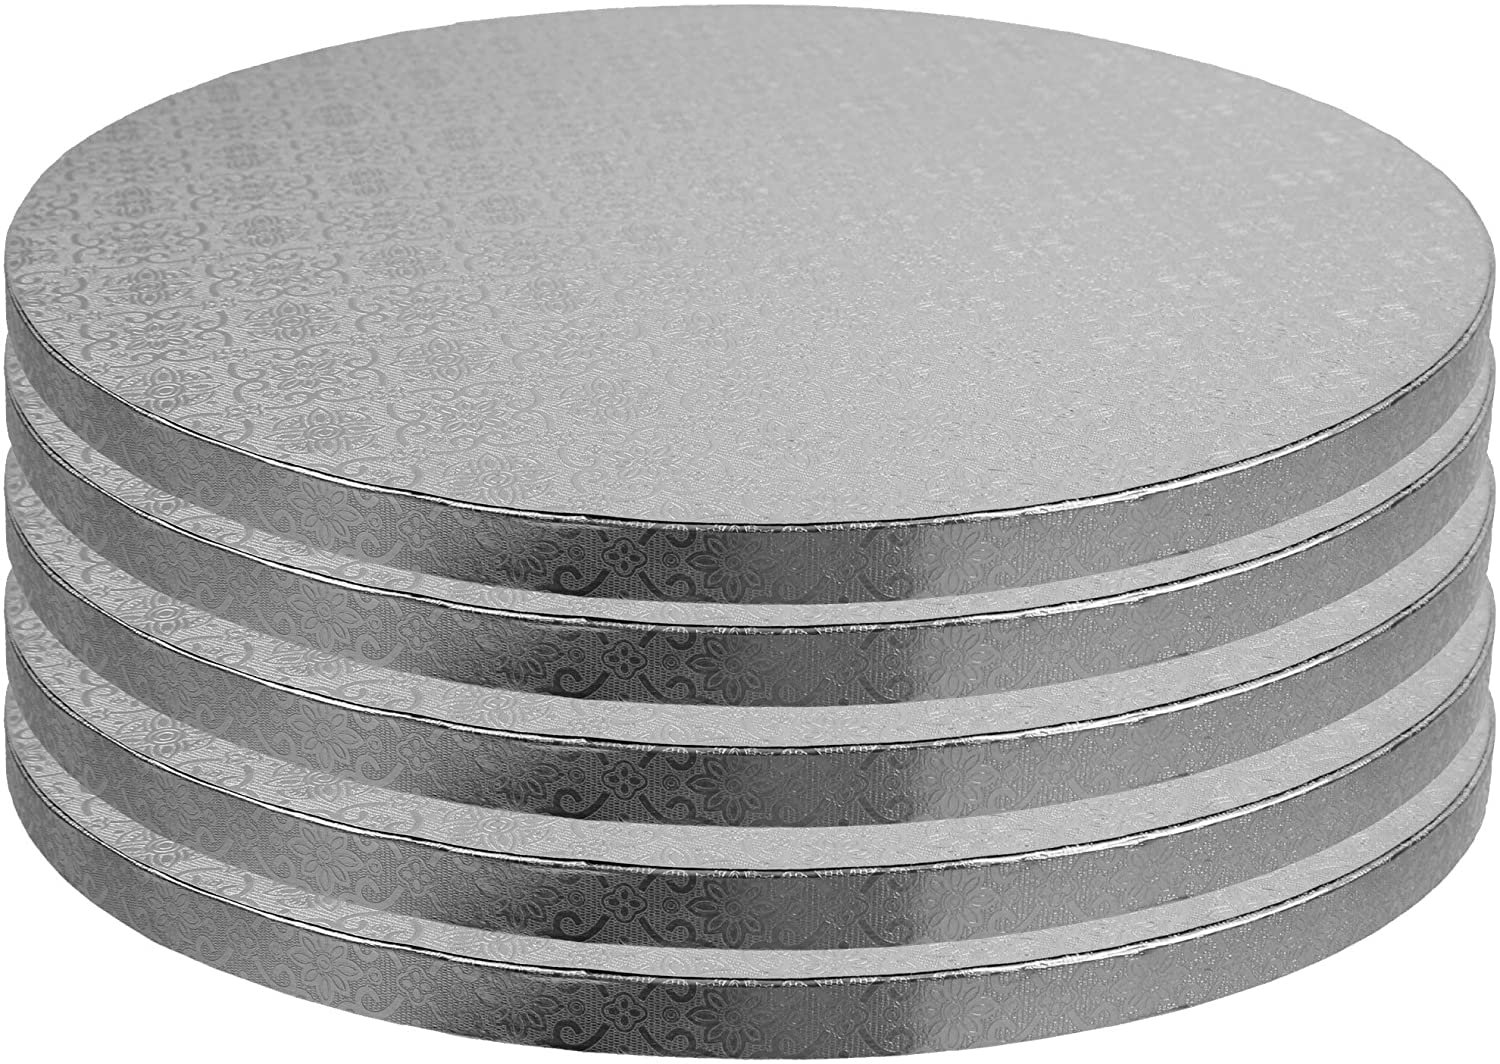 OCreme Cake Board, Silver Foil Round Cake Circles with Gorgeous Design, Sturdy & Durable 1/2 Thick Cake Drums, Round Cake Boards with 9 Diameter, Pack of 5 Disposable Cake Drums - image 1 of 6